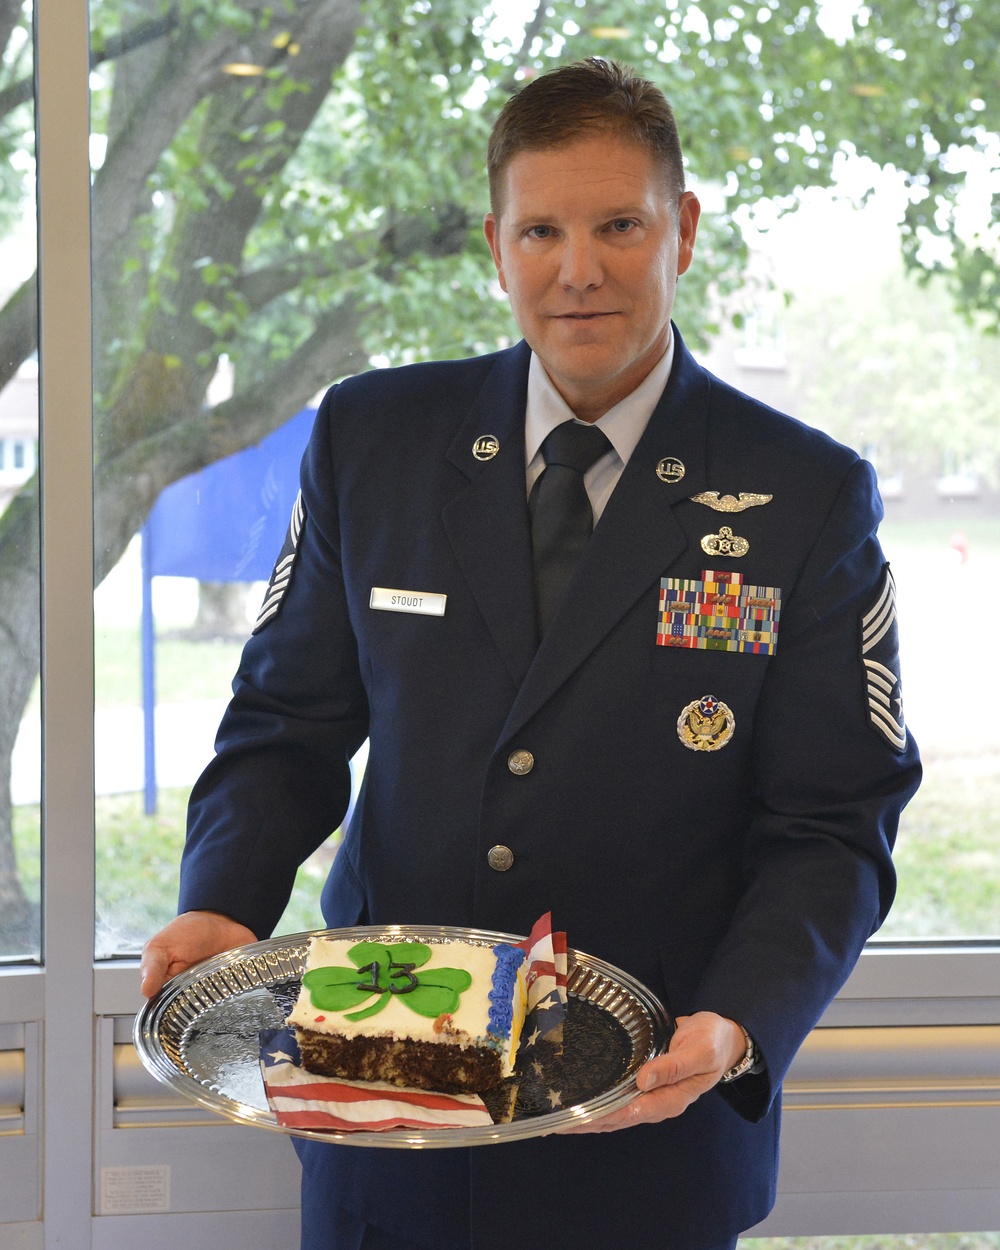 Lucky 13 for Chief Master Sgt. Thomas K. Stoudt